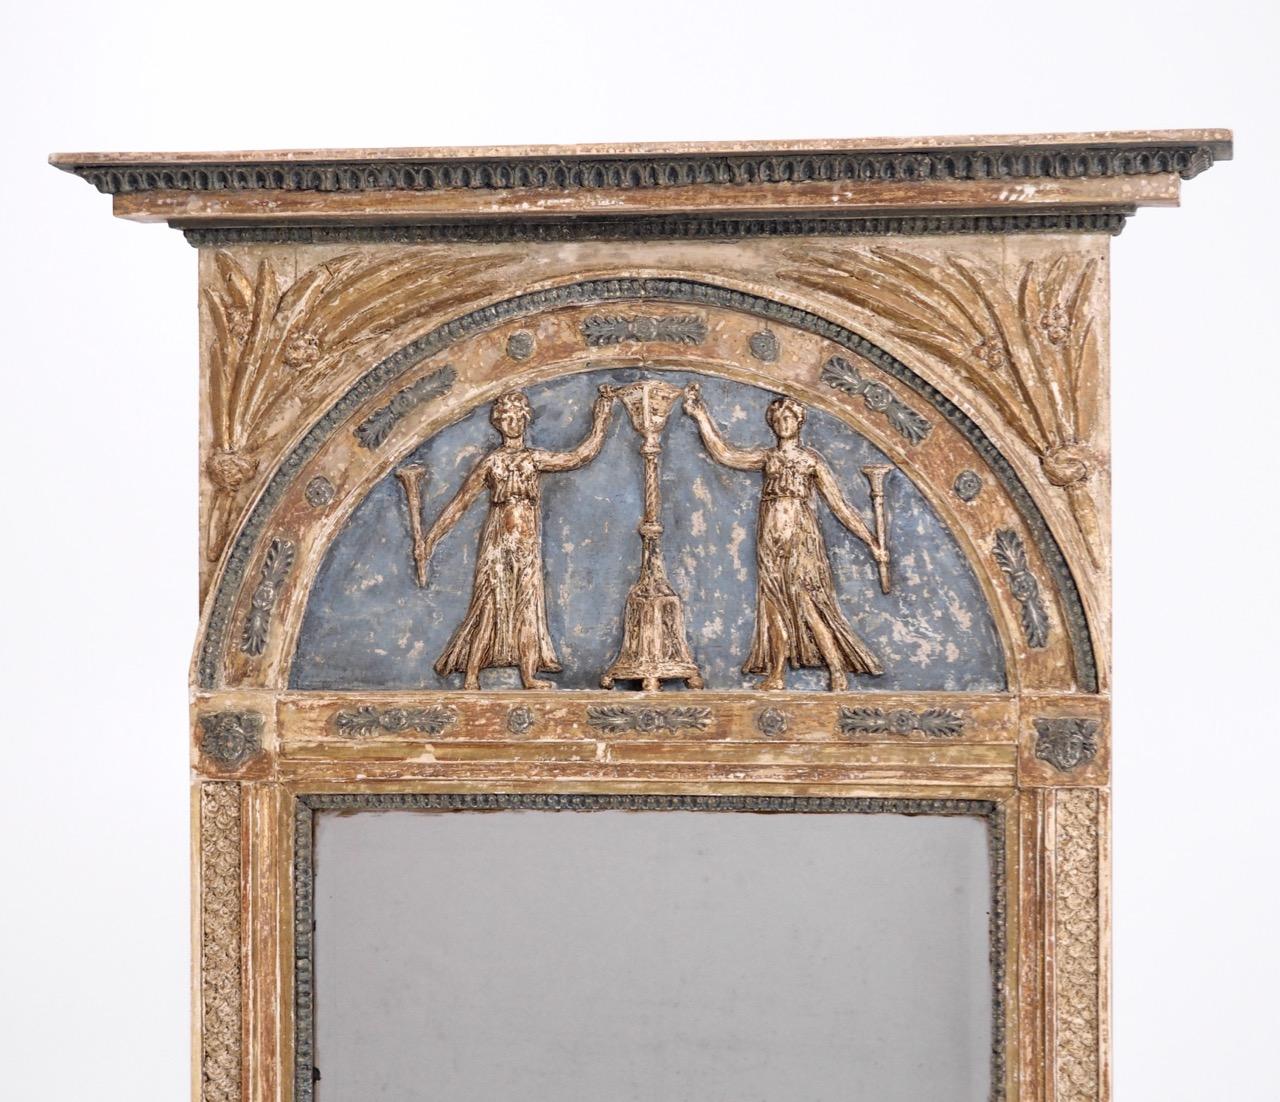 Large Gustavian mirror in original paint and guilt, Stockholm master, and old glass, circa 1790-1810.
Measures: H. 154 W. 82 D. 10 cm
H. 60.6 W. 32.2 D. 3.9 in.